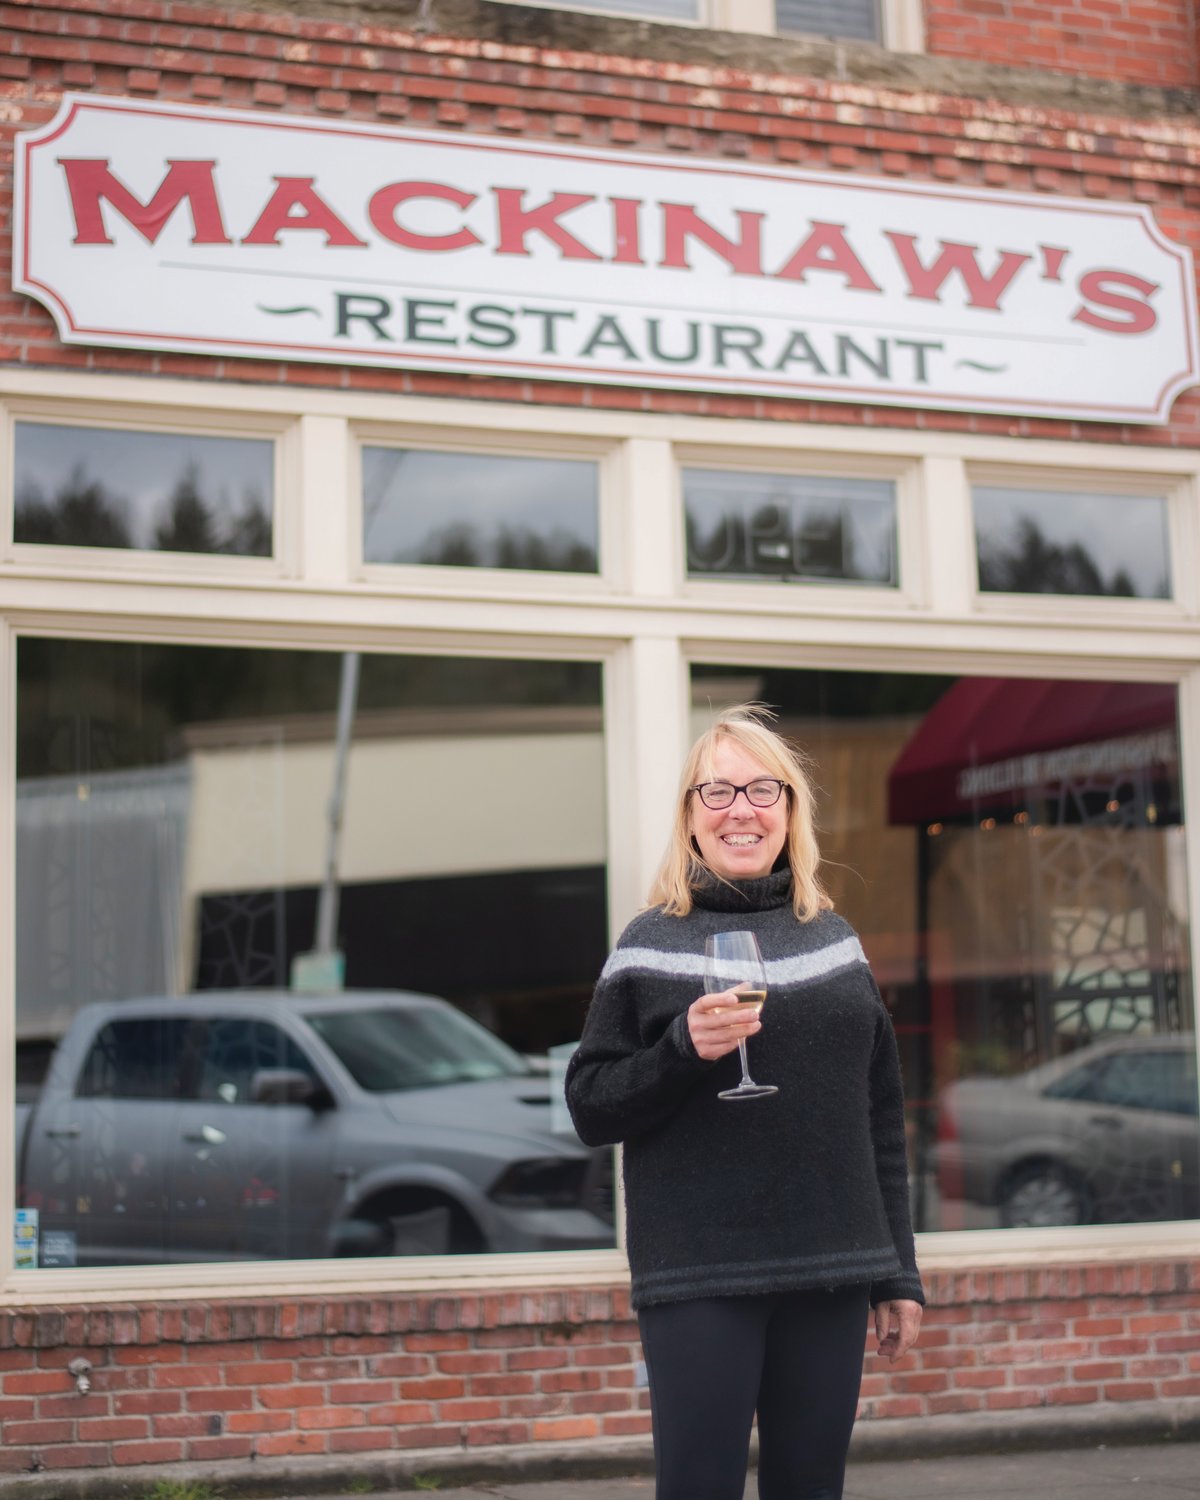 Jared Wenzelburger / jared@chronline.com
Laurel Khan smiles outside Mackinaw’s while holding a glass of non-alcoholic  wine Tuesday afternoon.